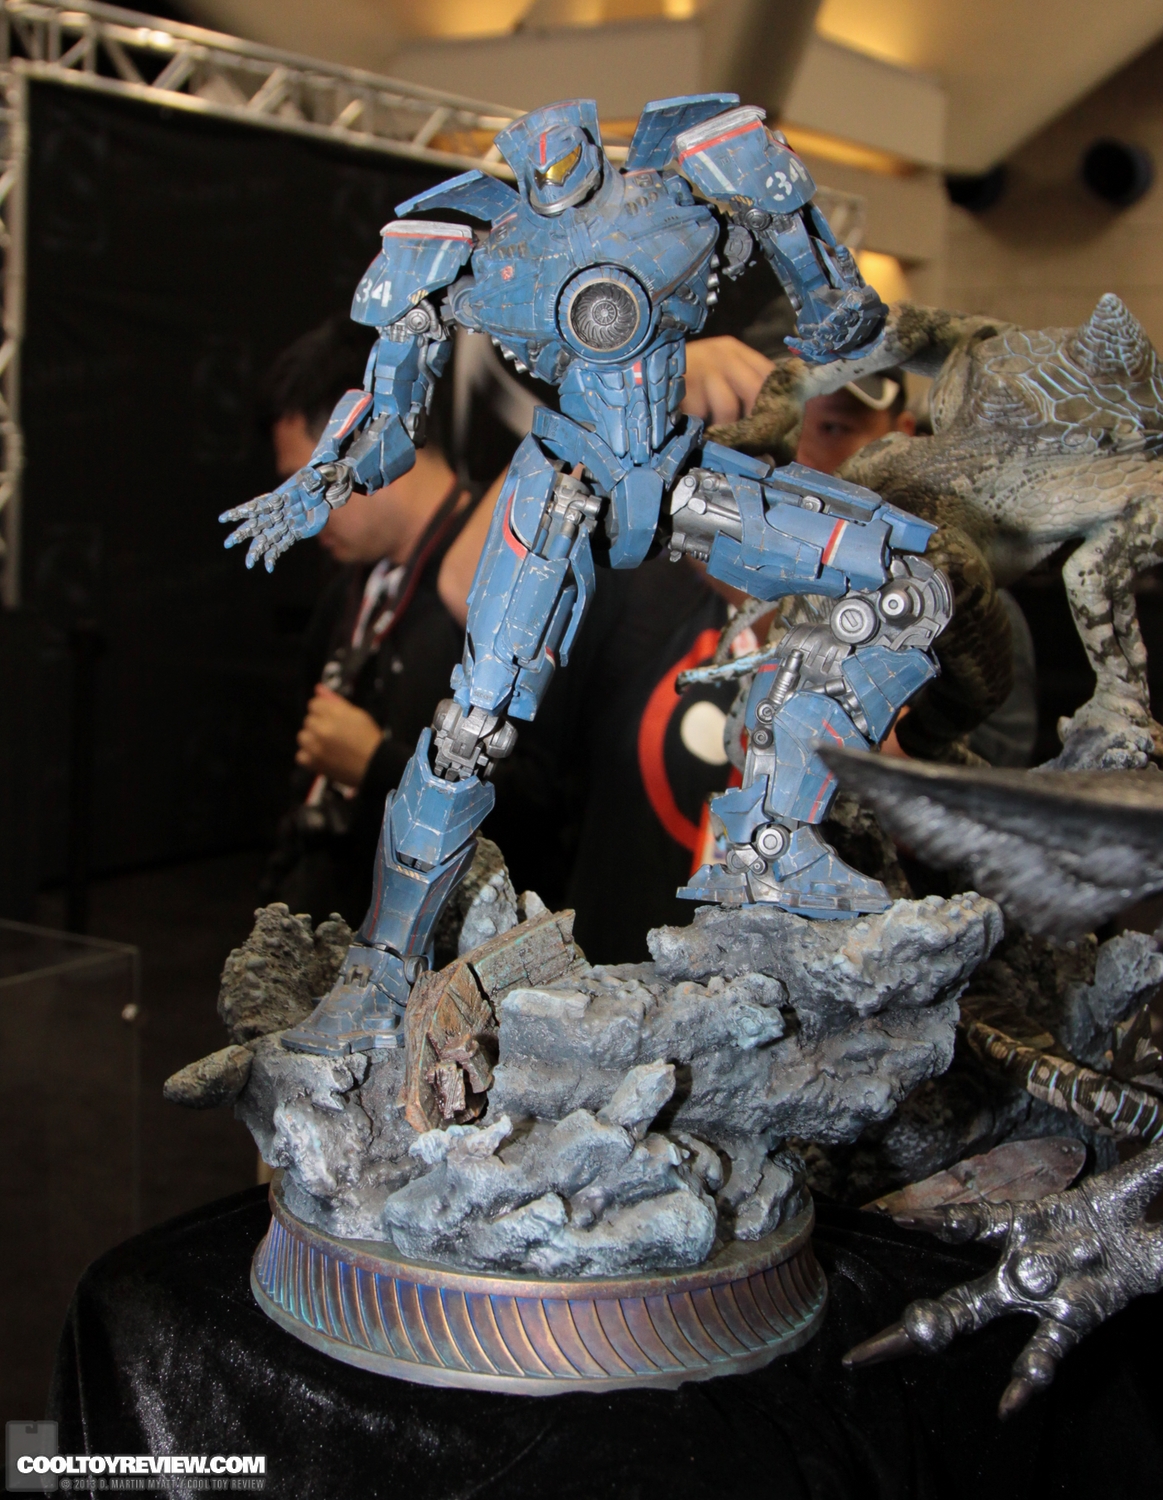 SDCC_2013_Sideshow_Collectibles_Thursday-084.jpg